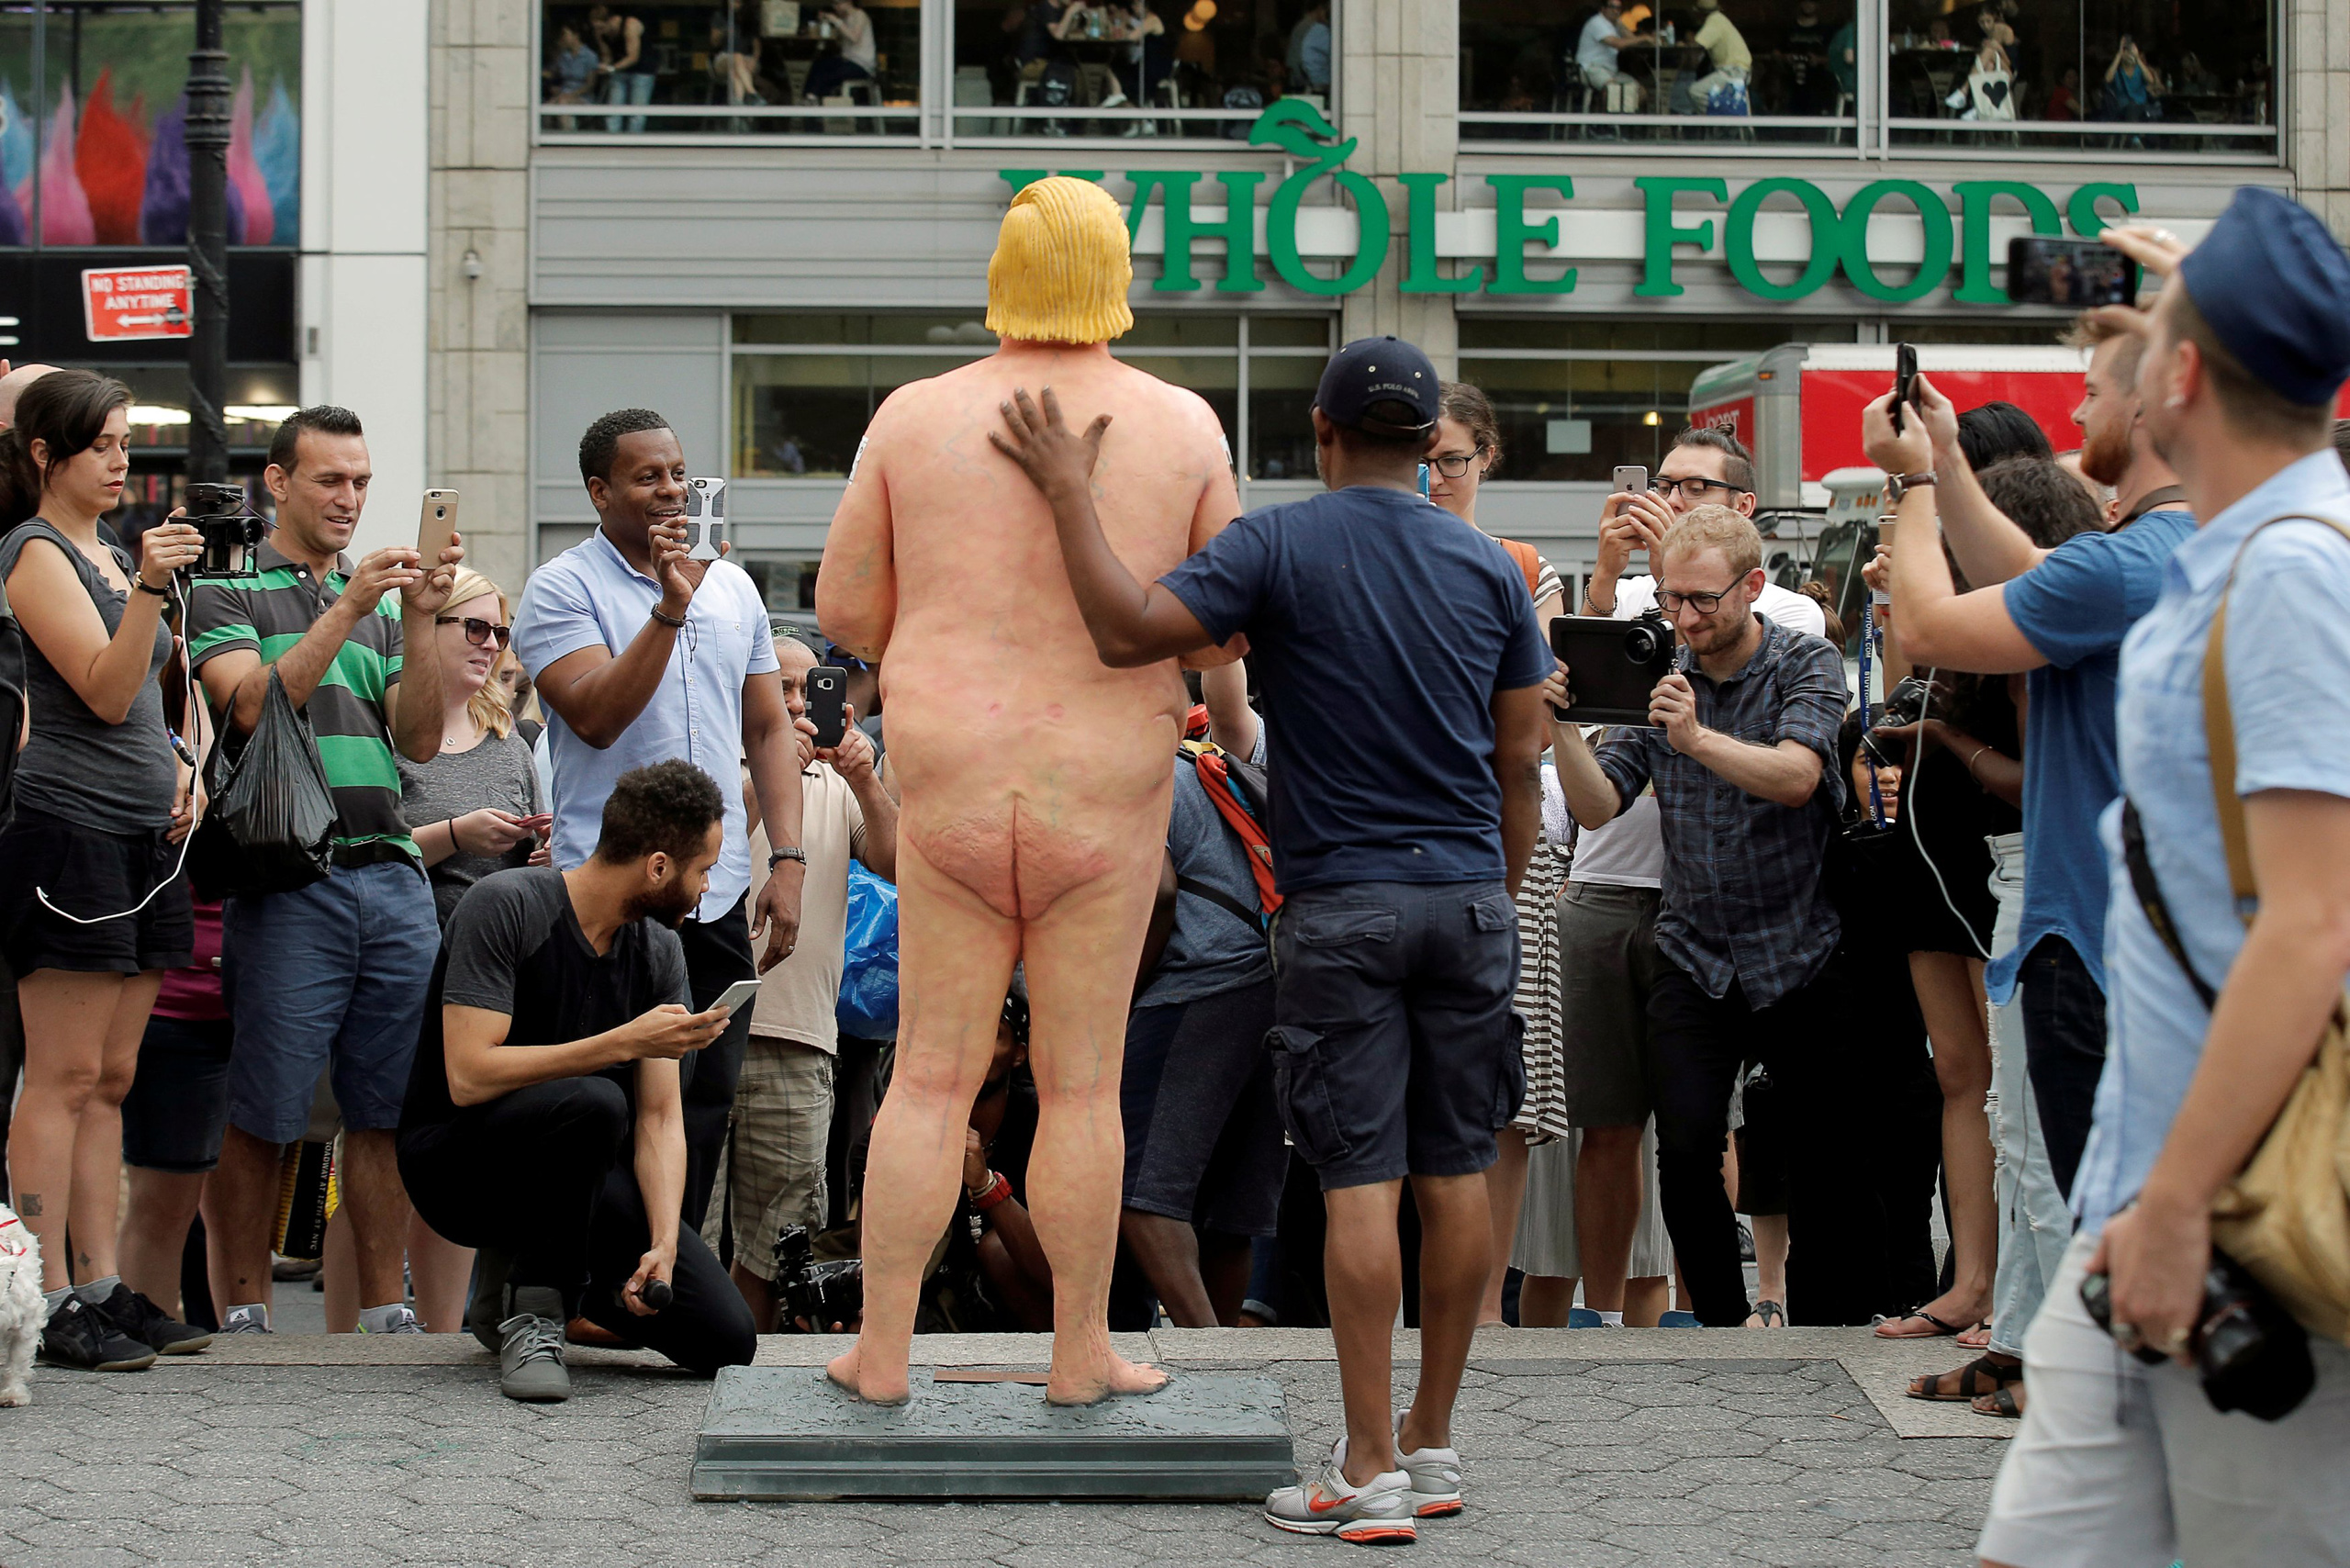 People photograph a naked statue of Republican U.S. presidential nominee Donald Trump that was left in Union Square Park in New York City on Aug. 18, 2016. (Brendan McDermid—Reuters)